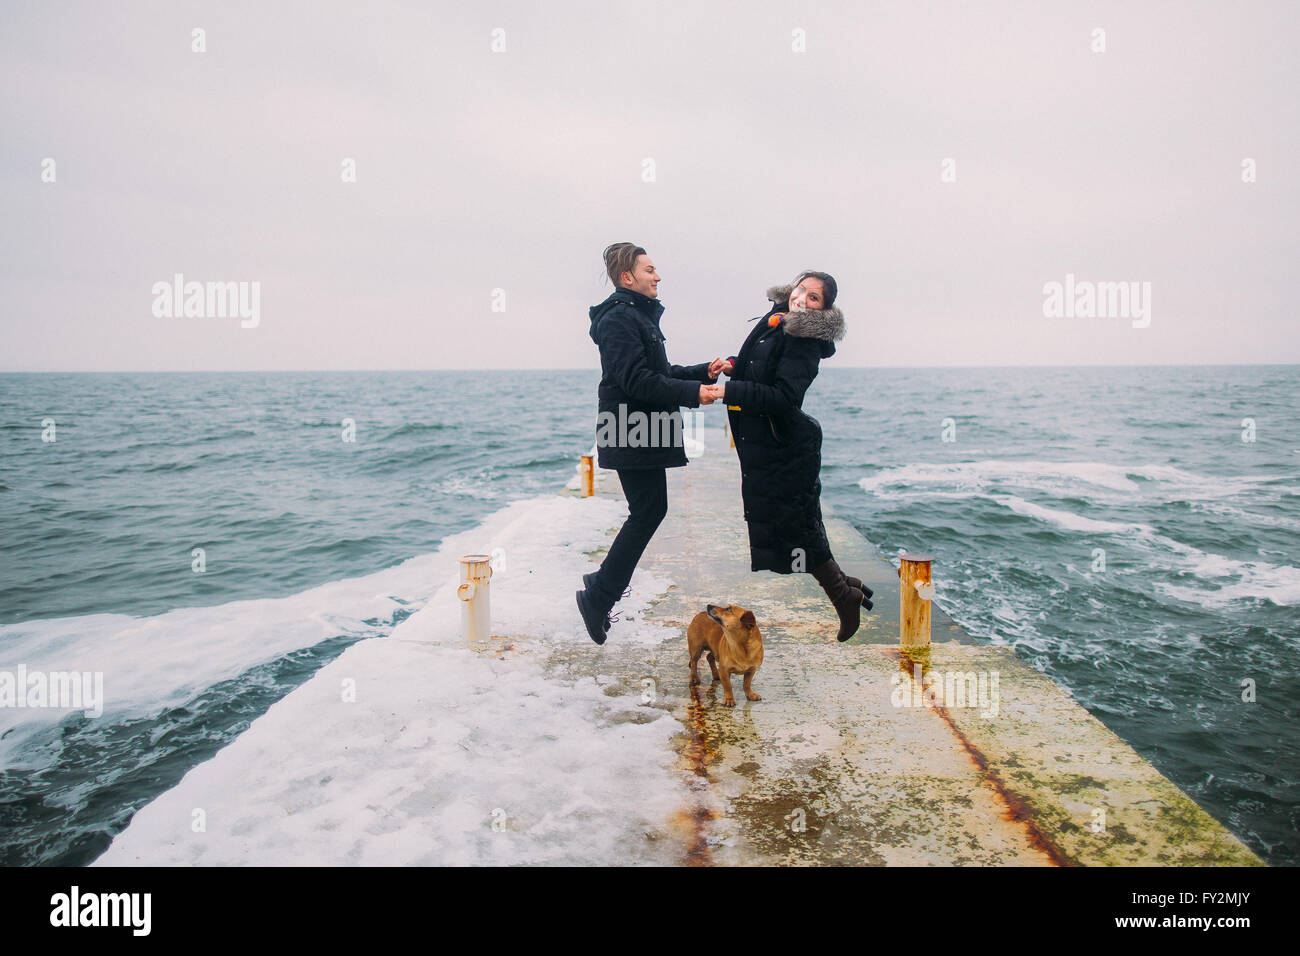 Rear romantic view of a young couple walking together with little dog and having fun on stoned pier during rainy autumn day. Winter sea background Stock Photo